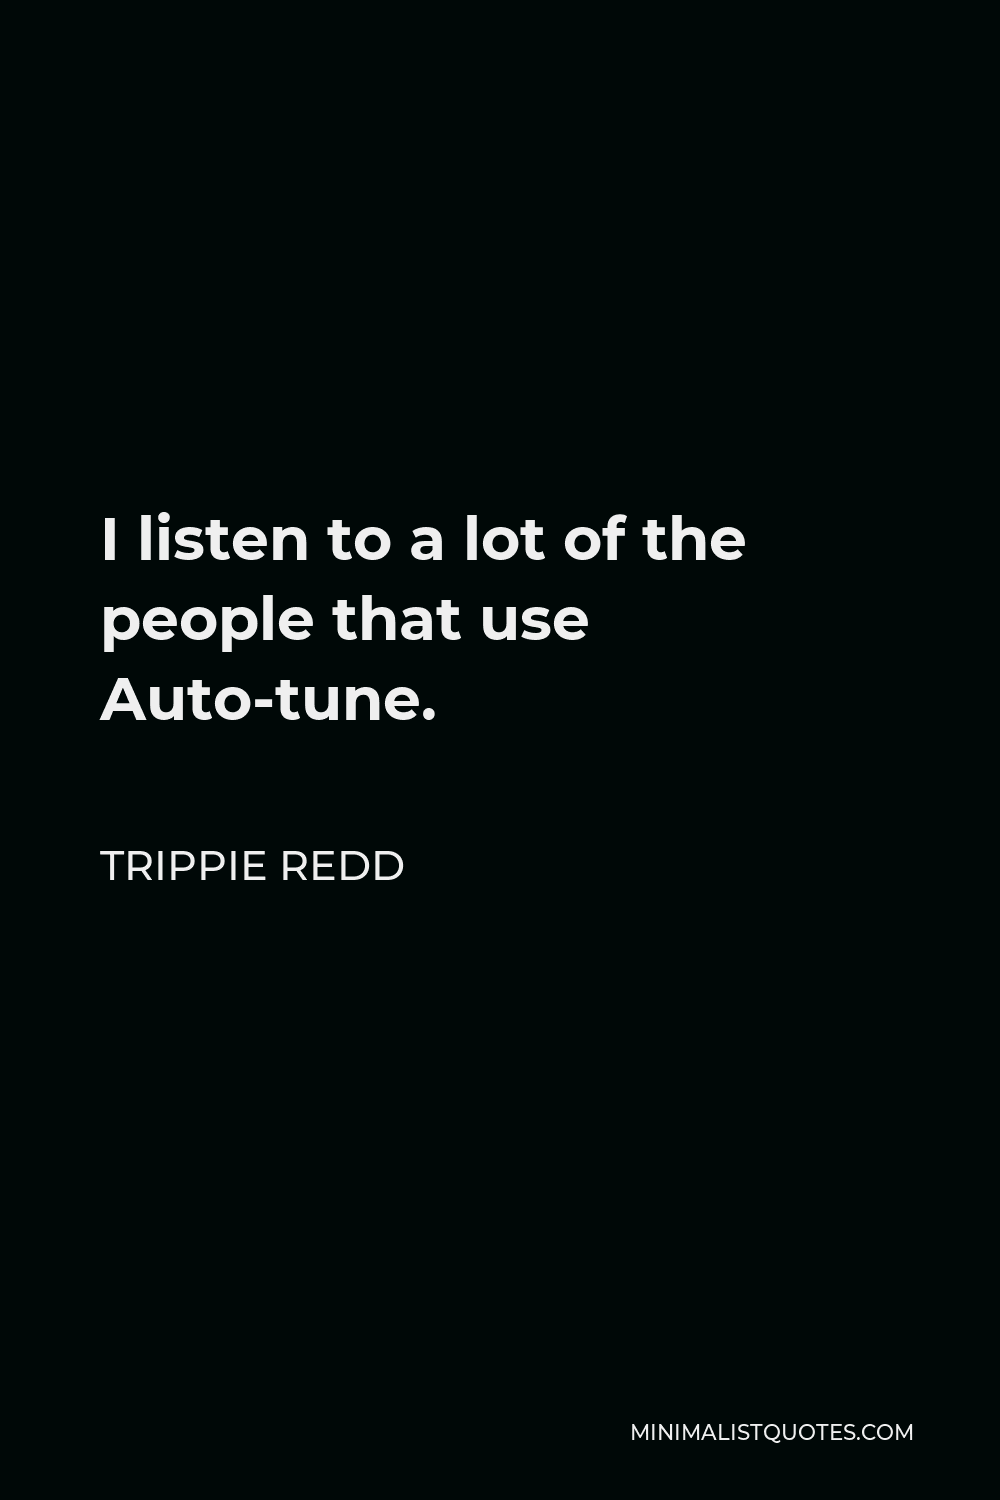 Trippie Redd Quote - I listen to a lot of the people that use Auto-tune.